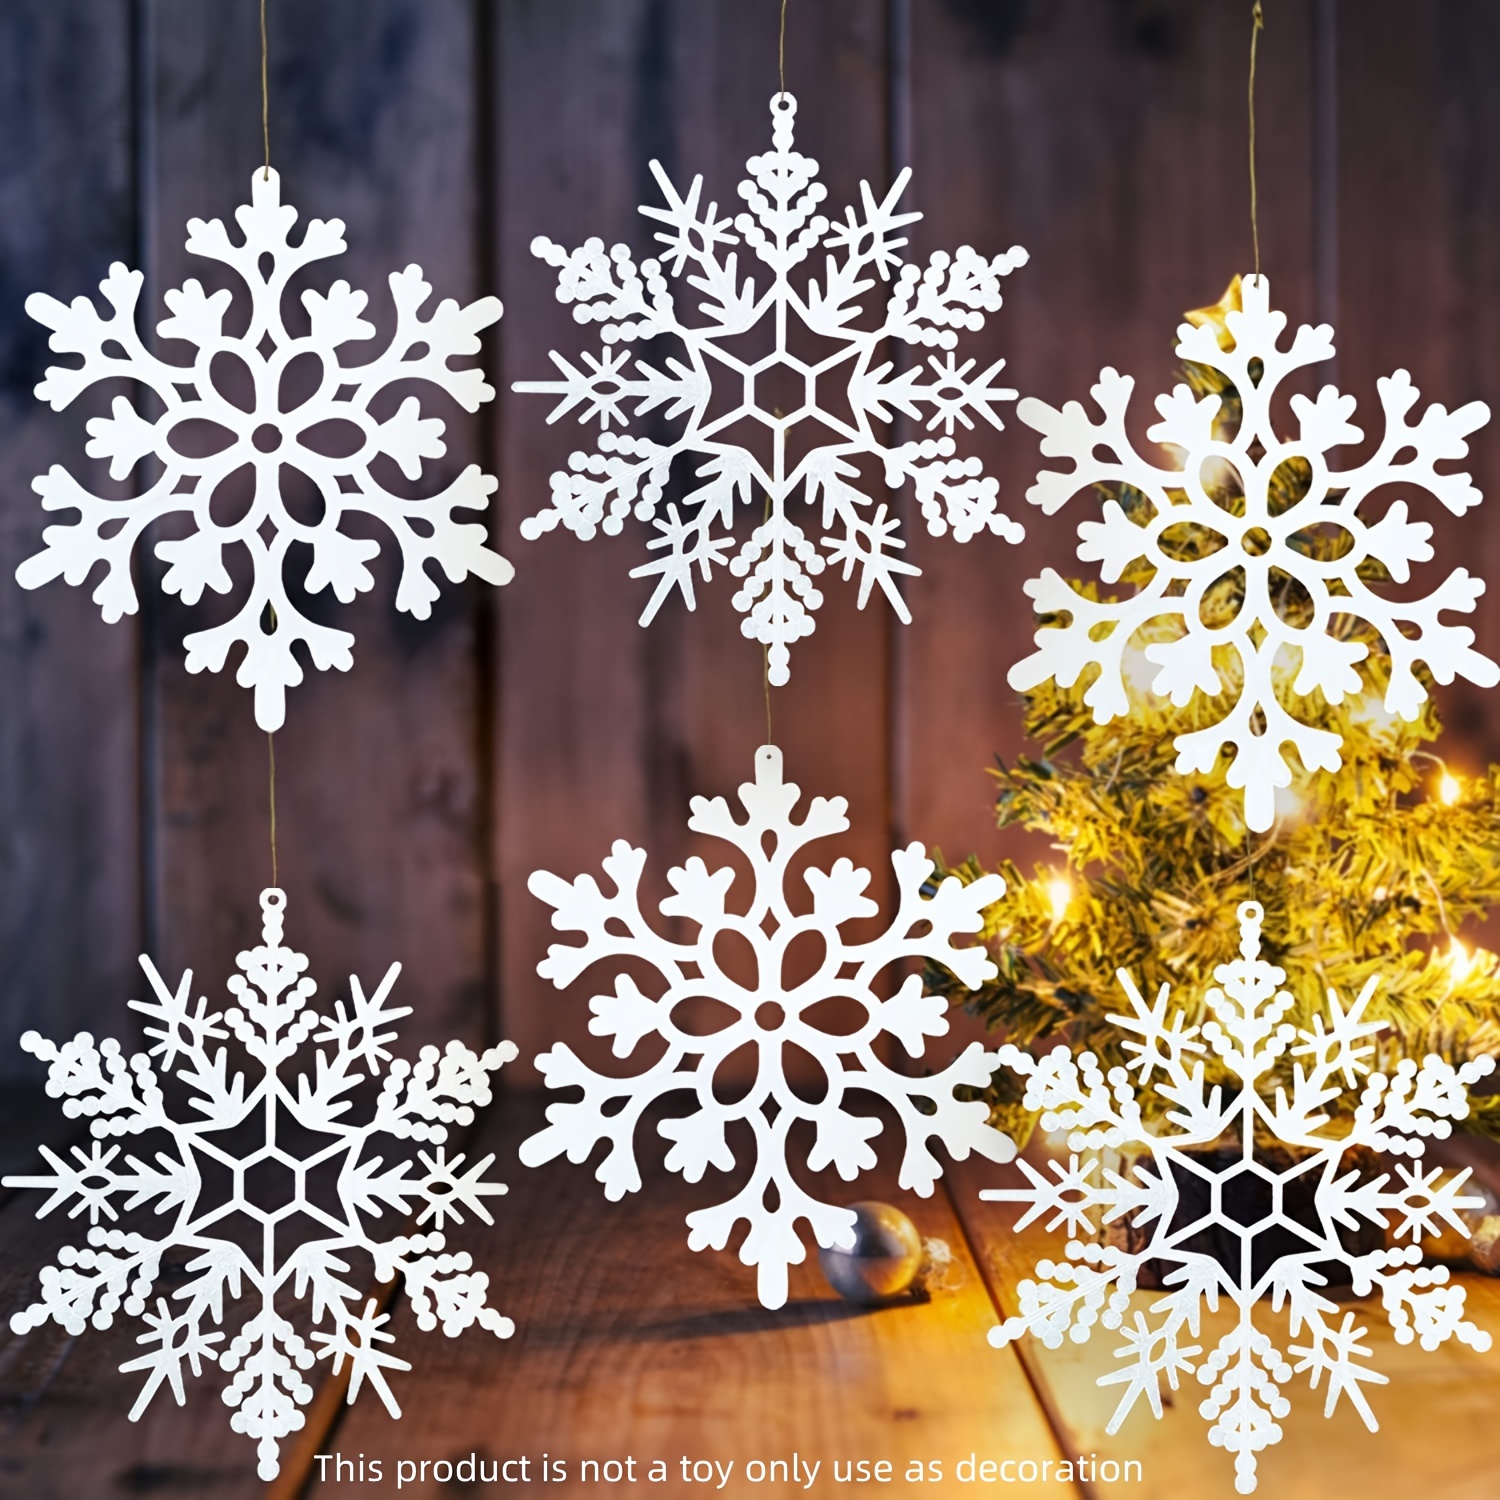 EIMMBD 8pcs Large Snowflakes Ornaments, Plastic Glitter Snowflakes Hanging,  Snowflakes Decorations for Christmas Trees Window Door Indoor Outdoor